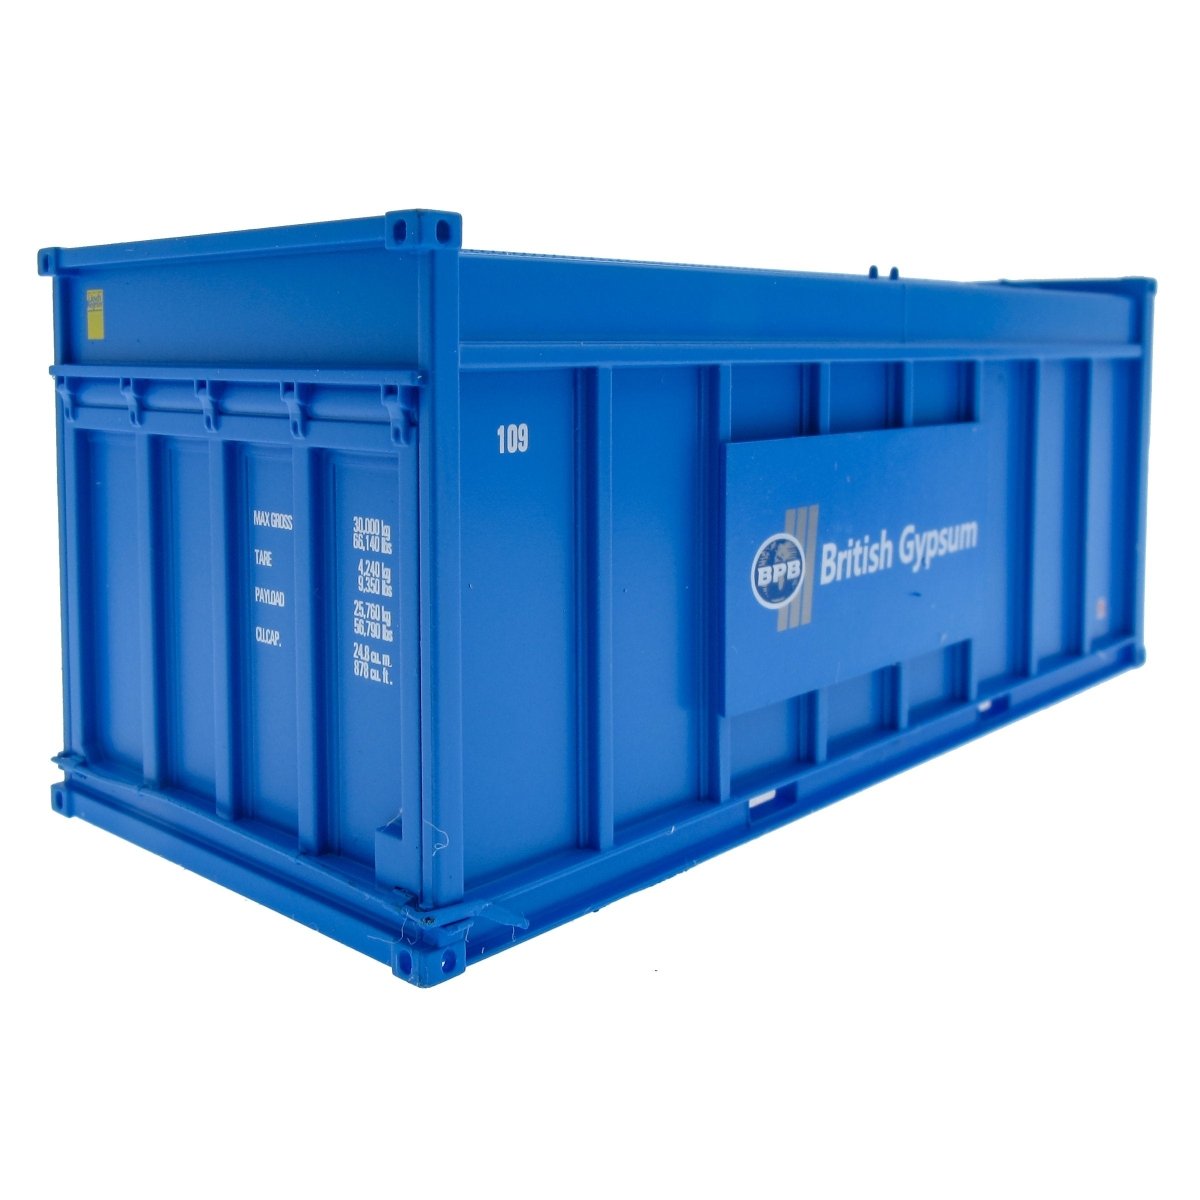 Accurascale Pack of 3 Gypsum 20' Containers - Blue Containers - Phillips Hobbies